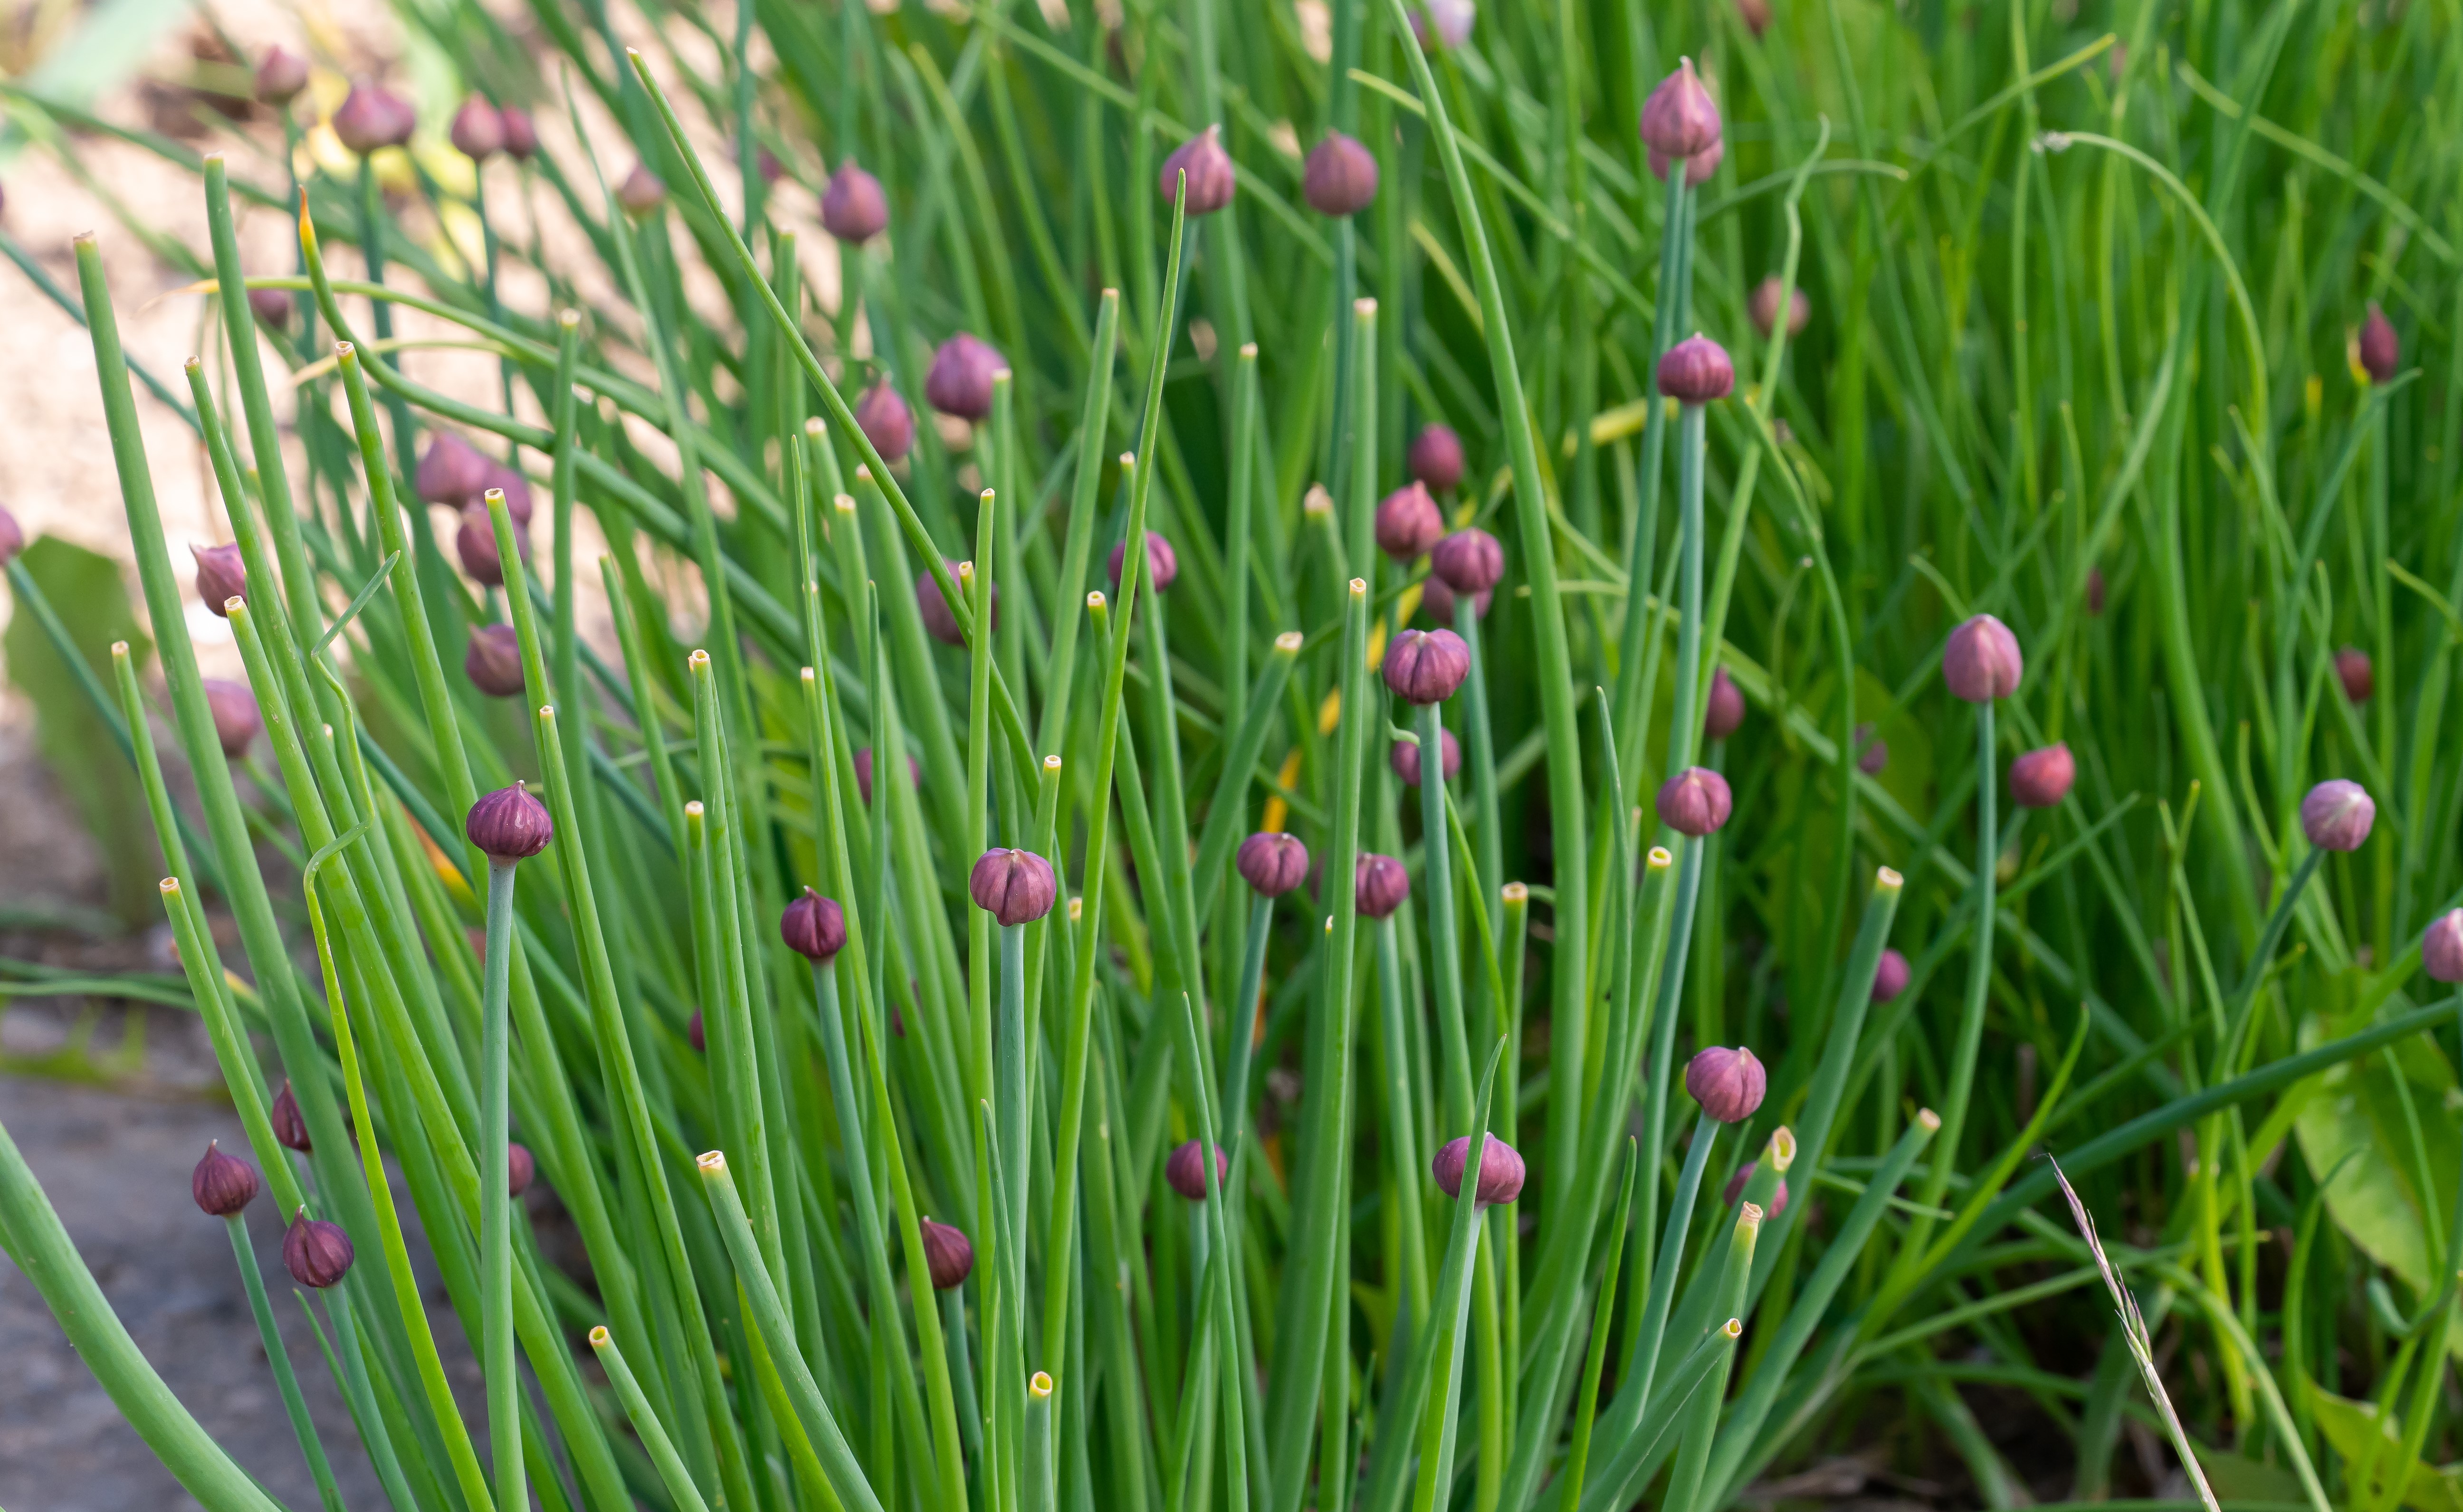 Chive plants with small flower buds